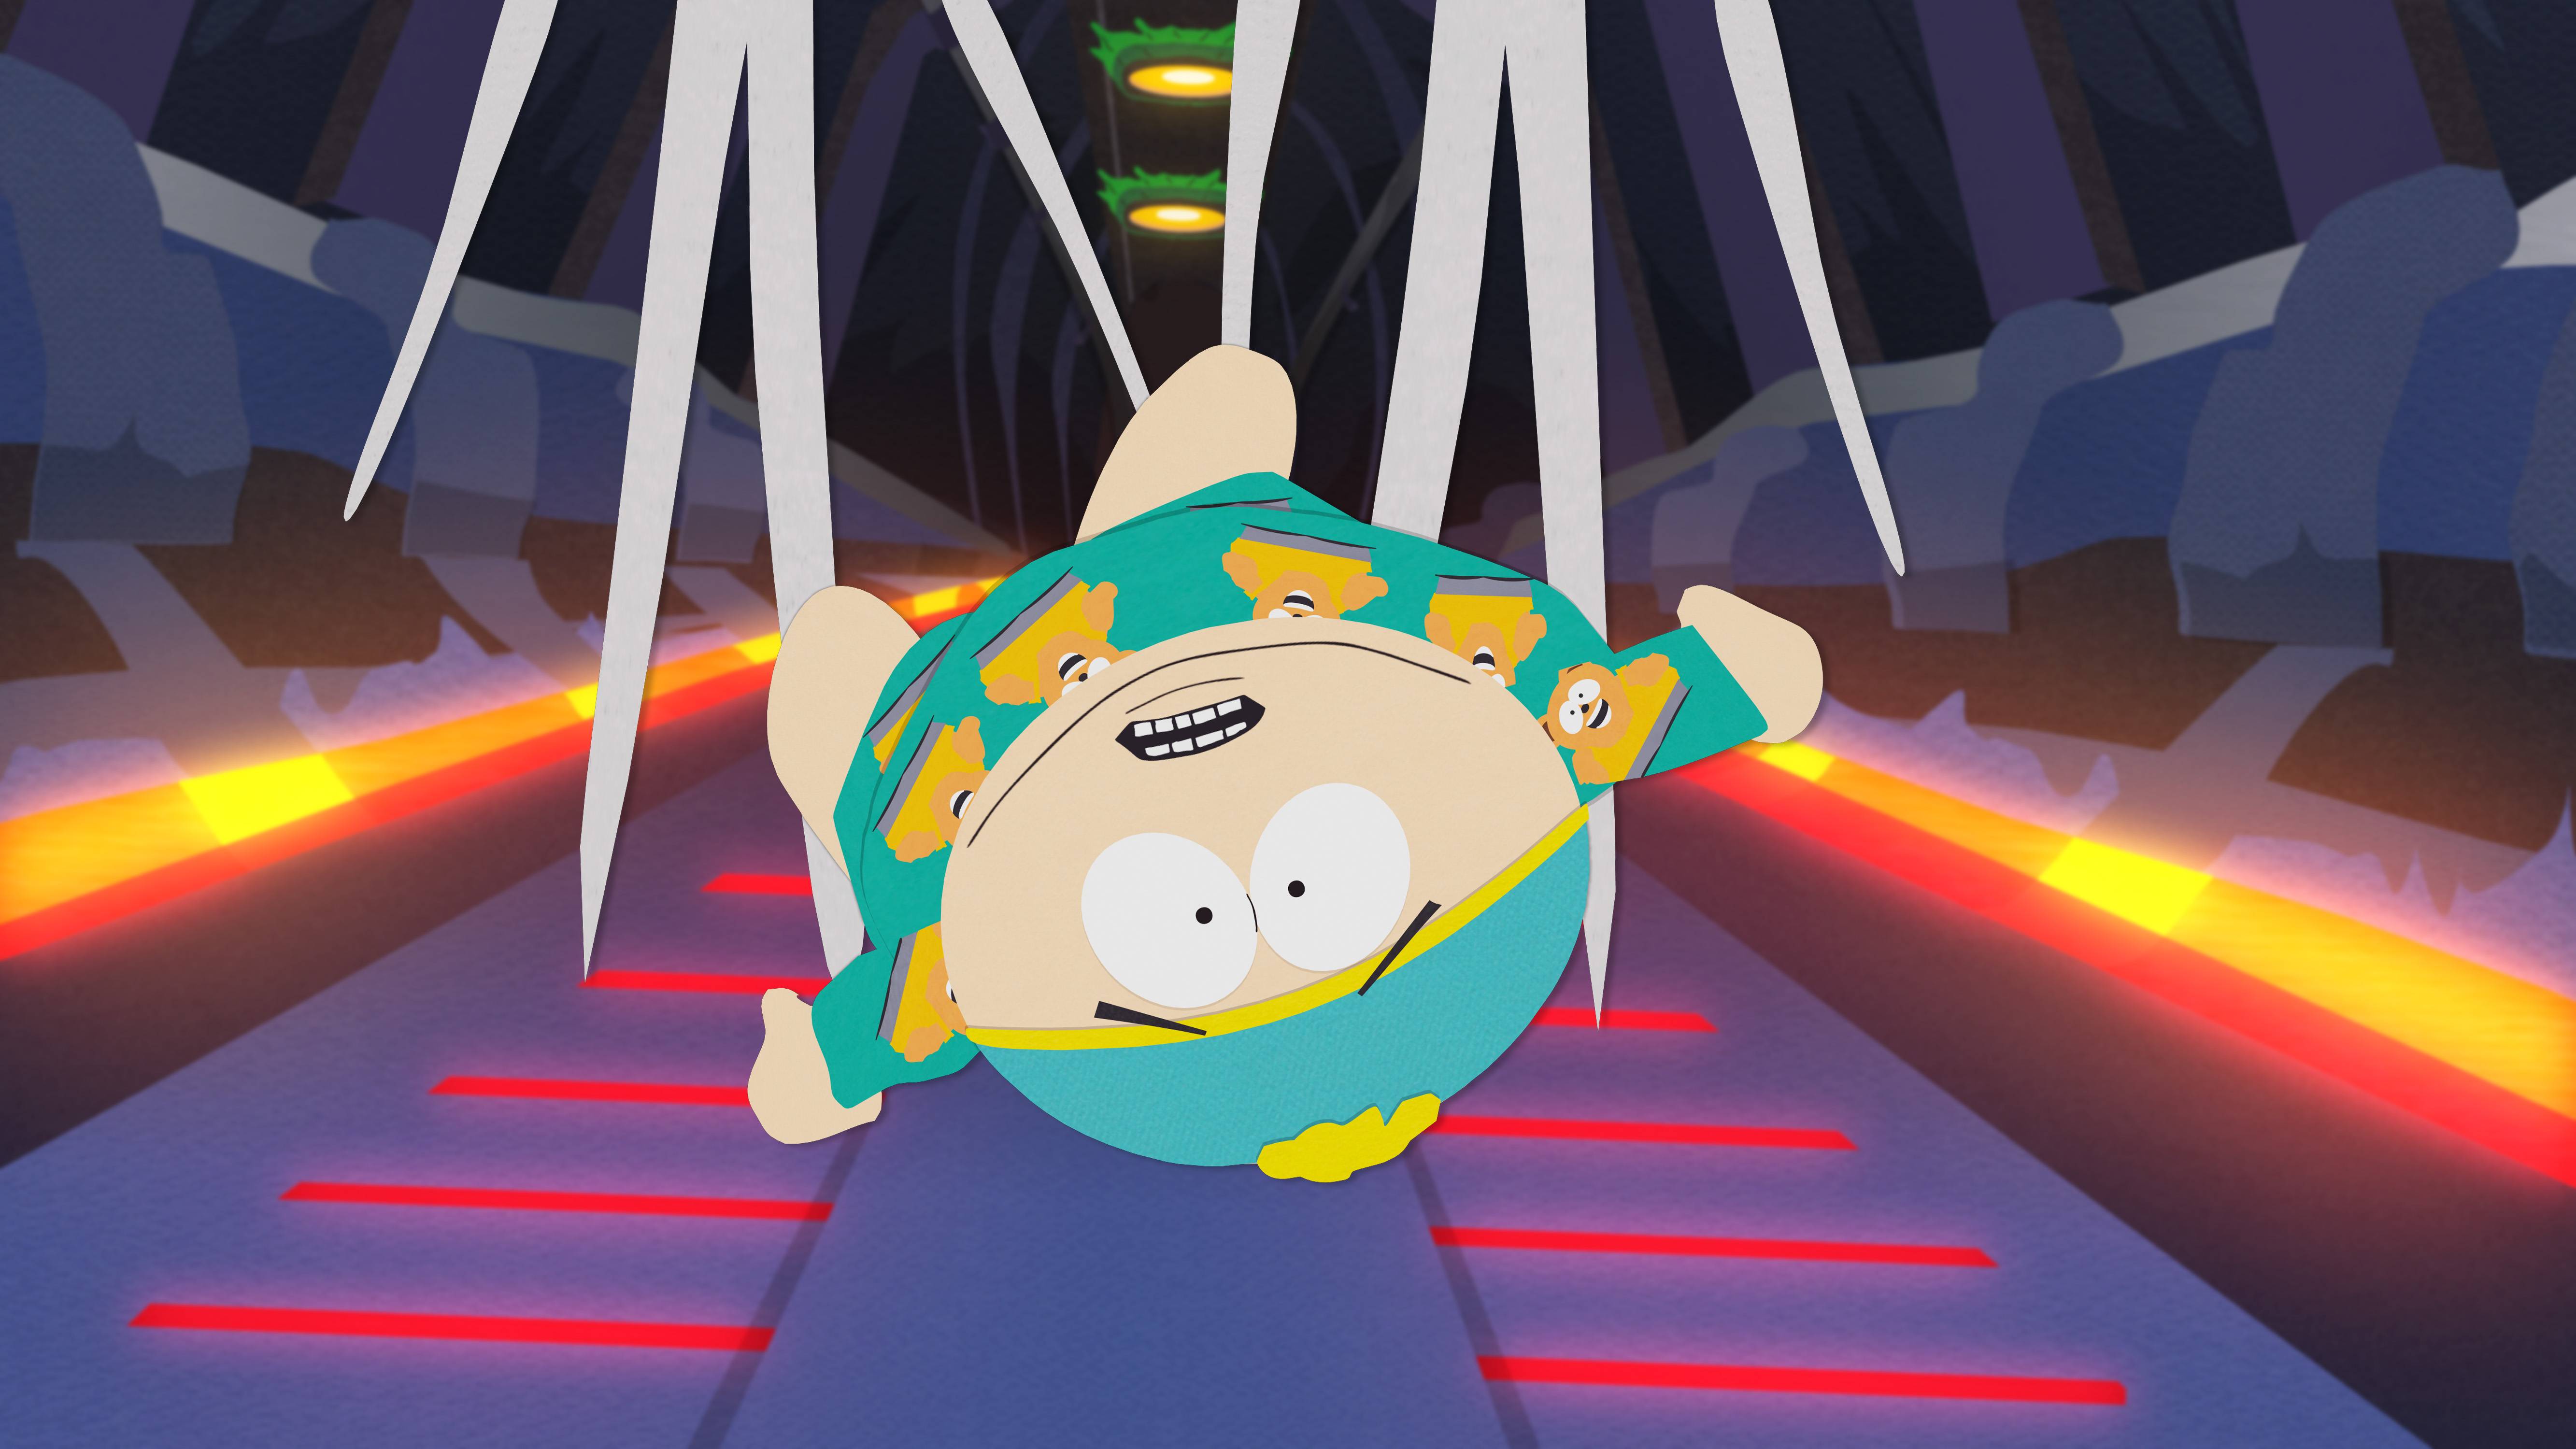 South Park': 21 'They Did WHAT?!' Episodes